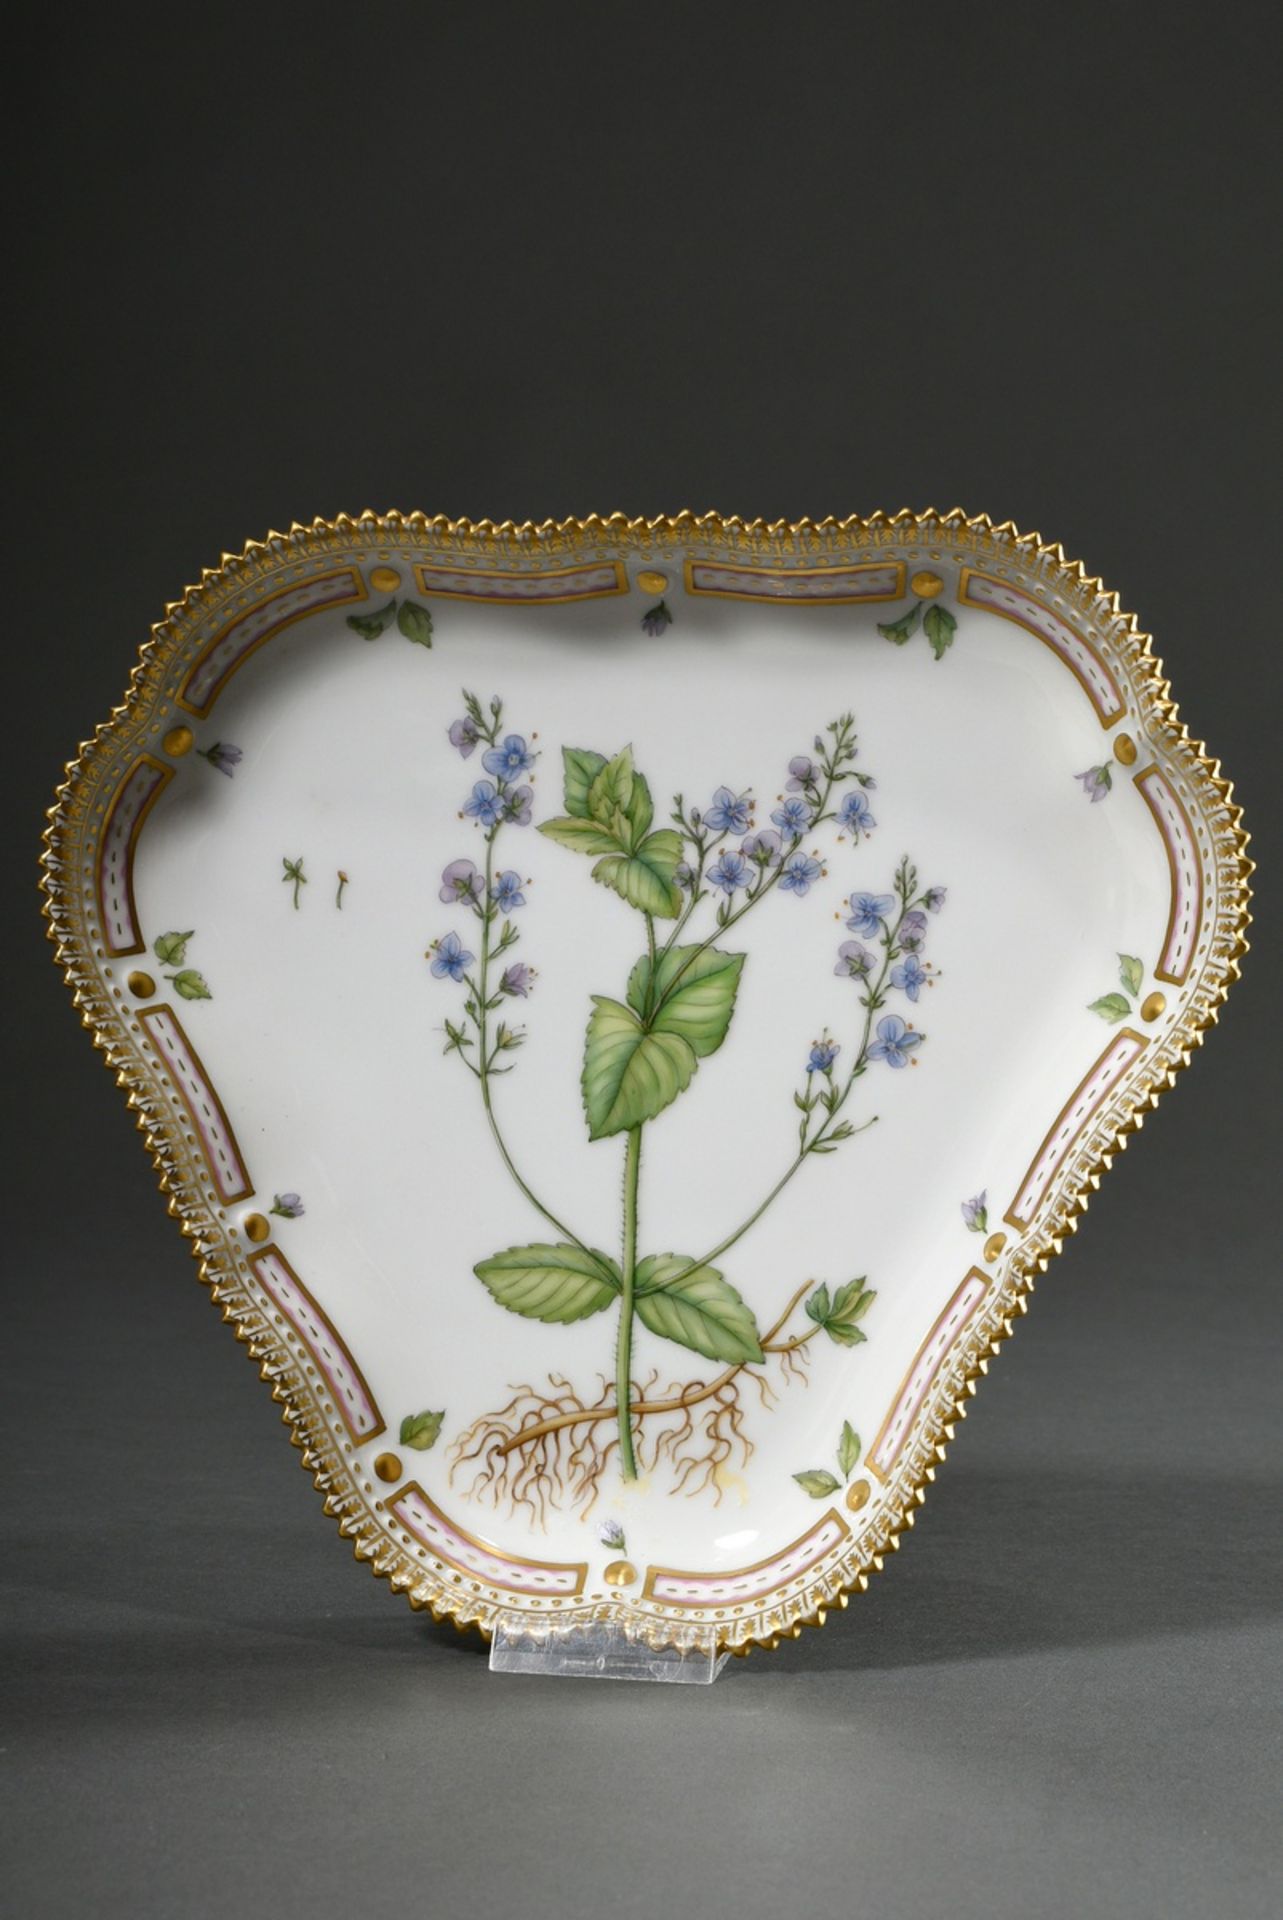 Small triangular Royal Copenhagen "Flora Danica" plate with polychrome painting in the mirror and g - Image 2 of 4